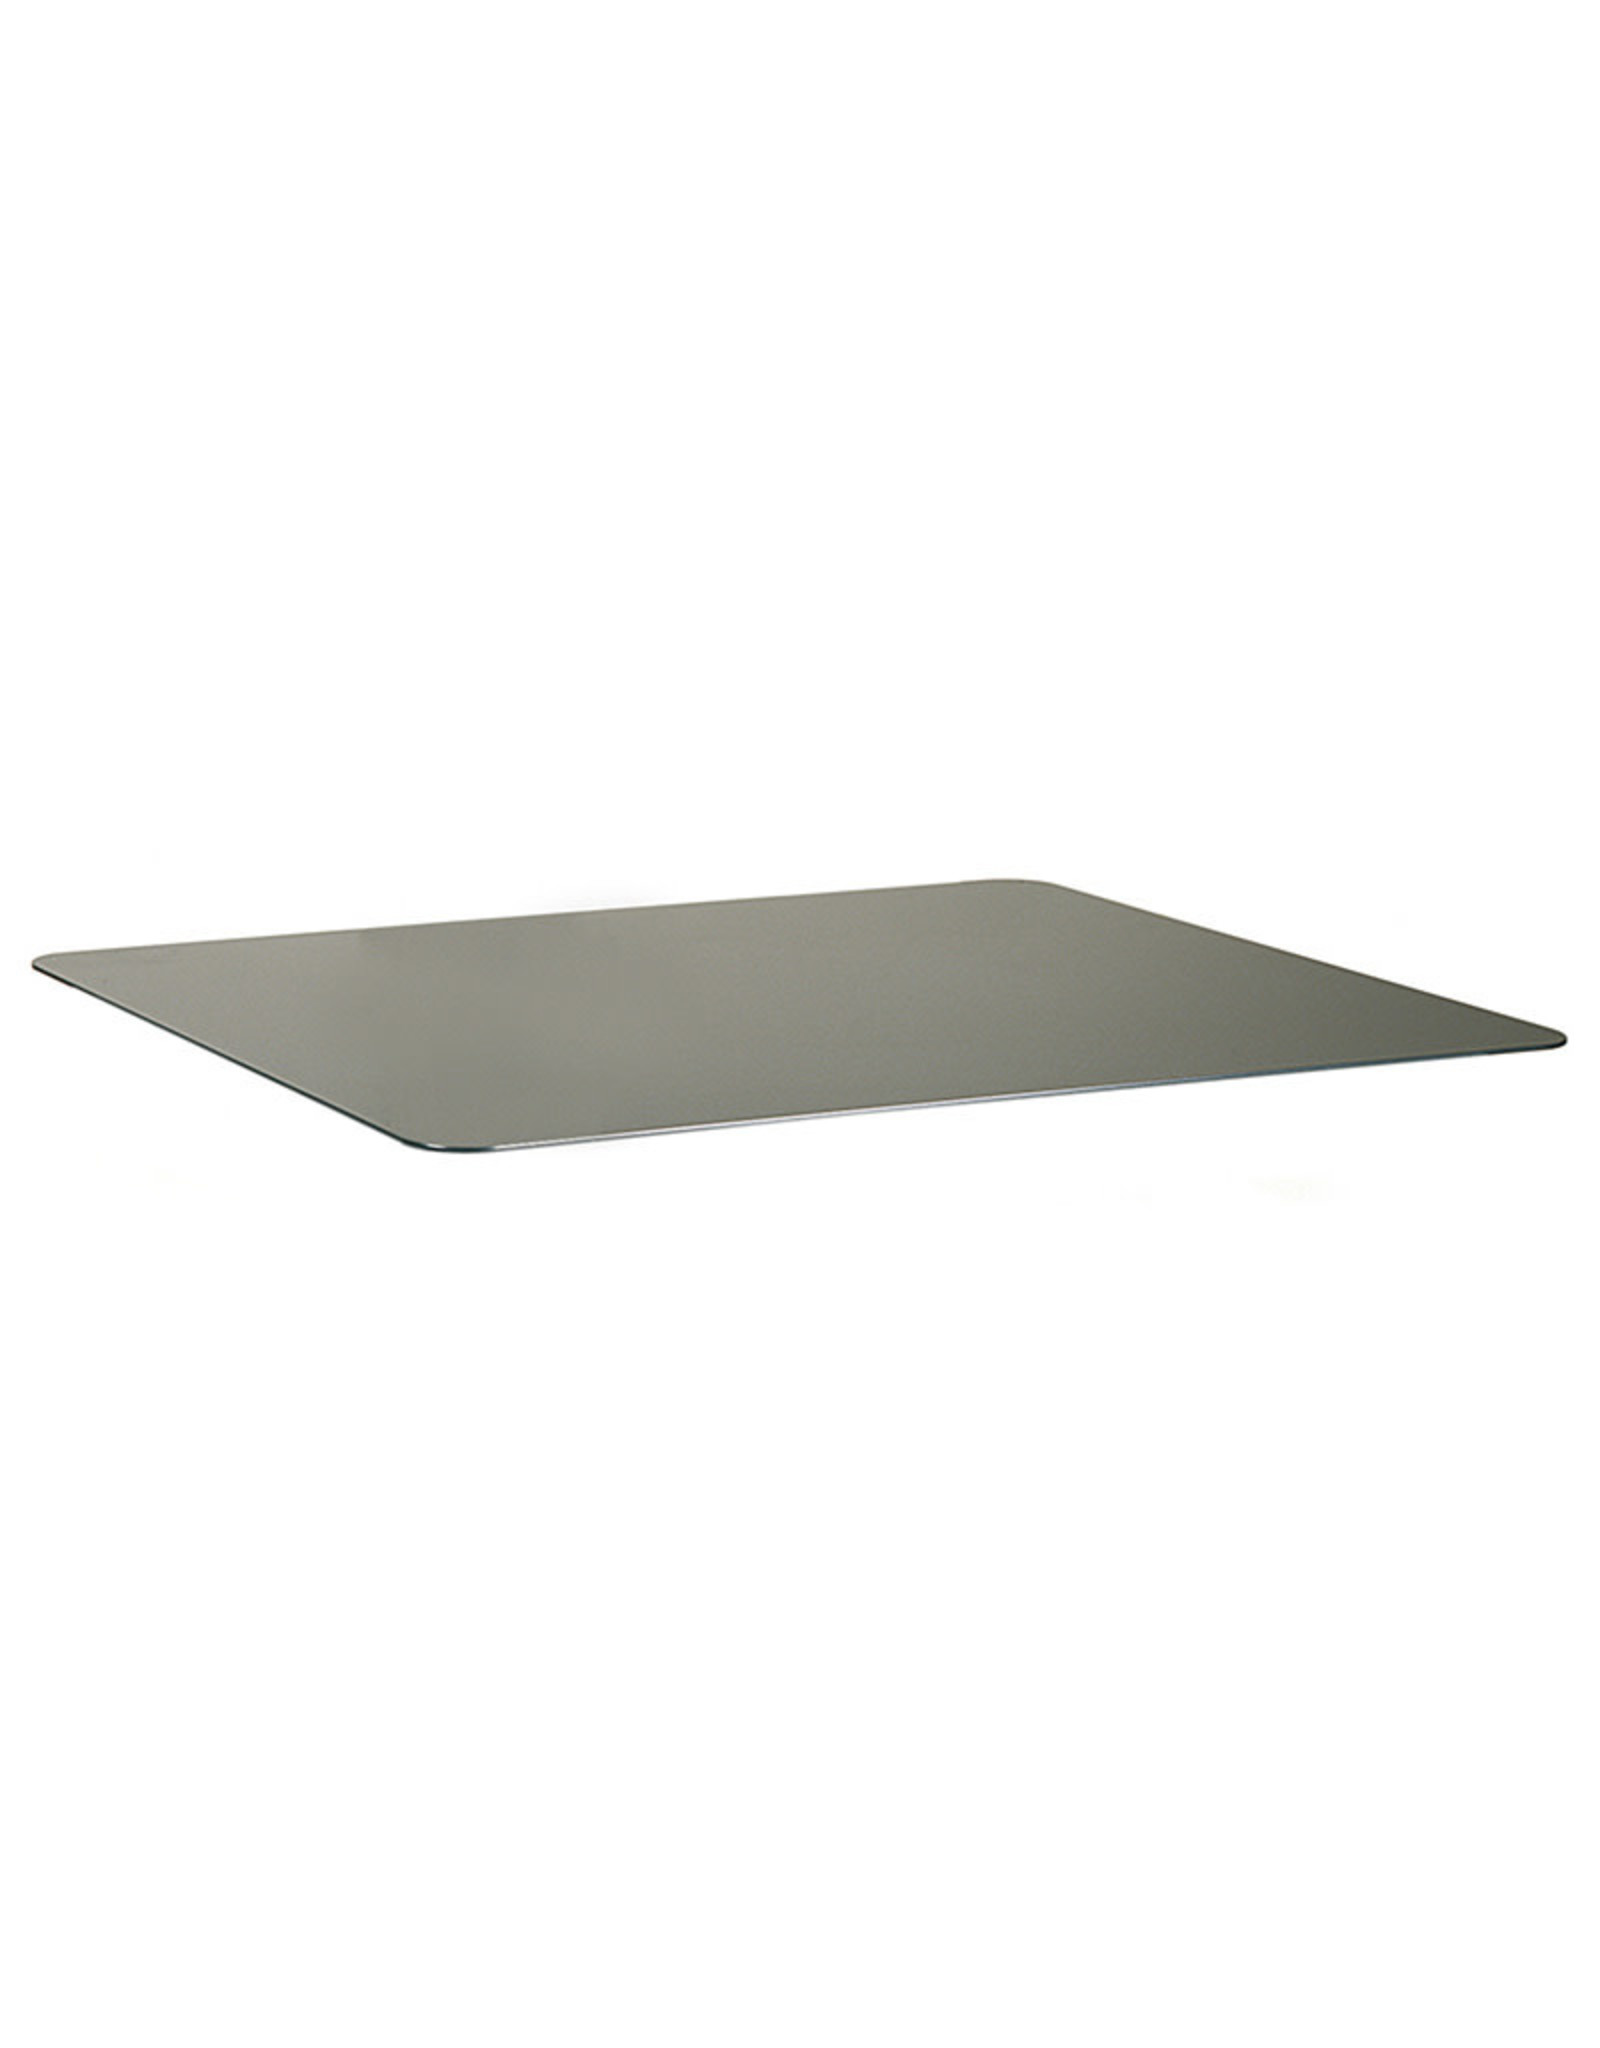 Kaiser Kaiser Sheet Steel Plate, fits on top of the RSP 2motion (5710) 1290 x 1 x 890 mm (A0)